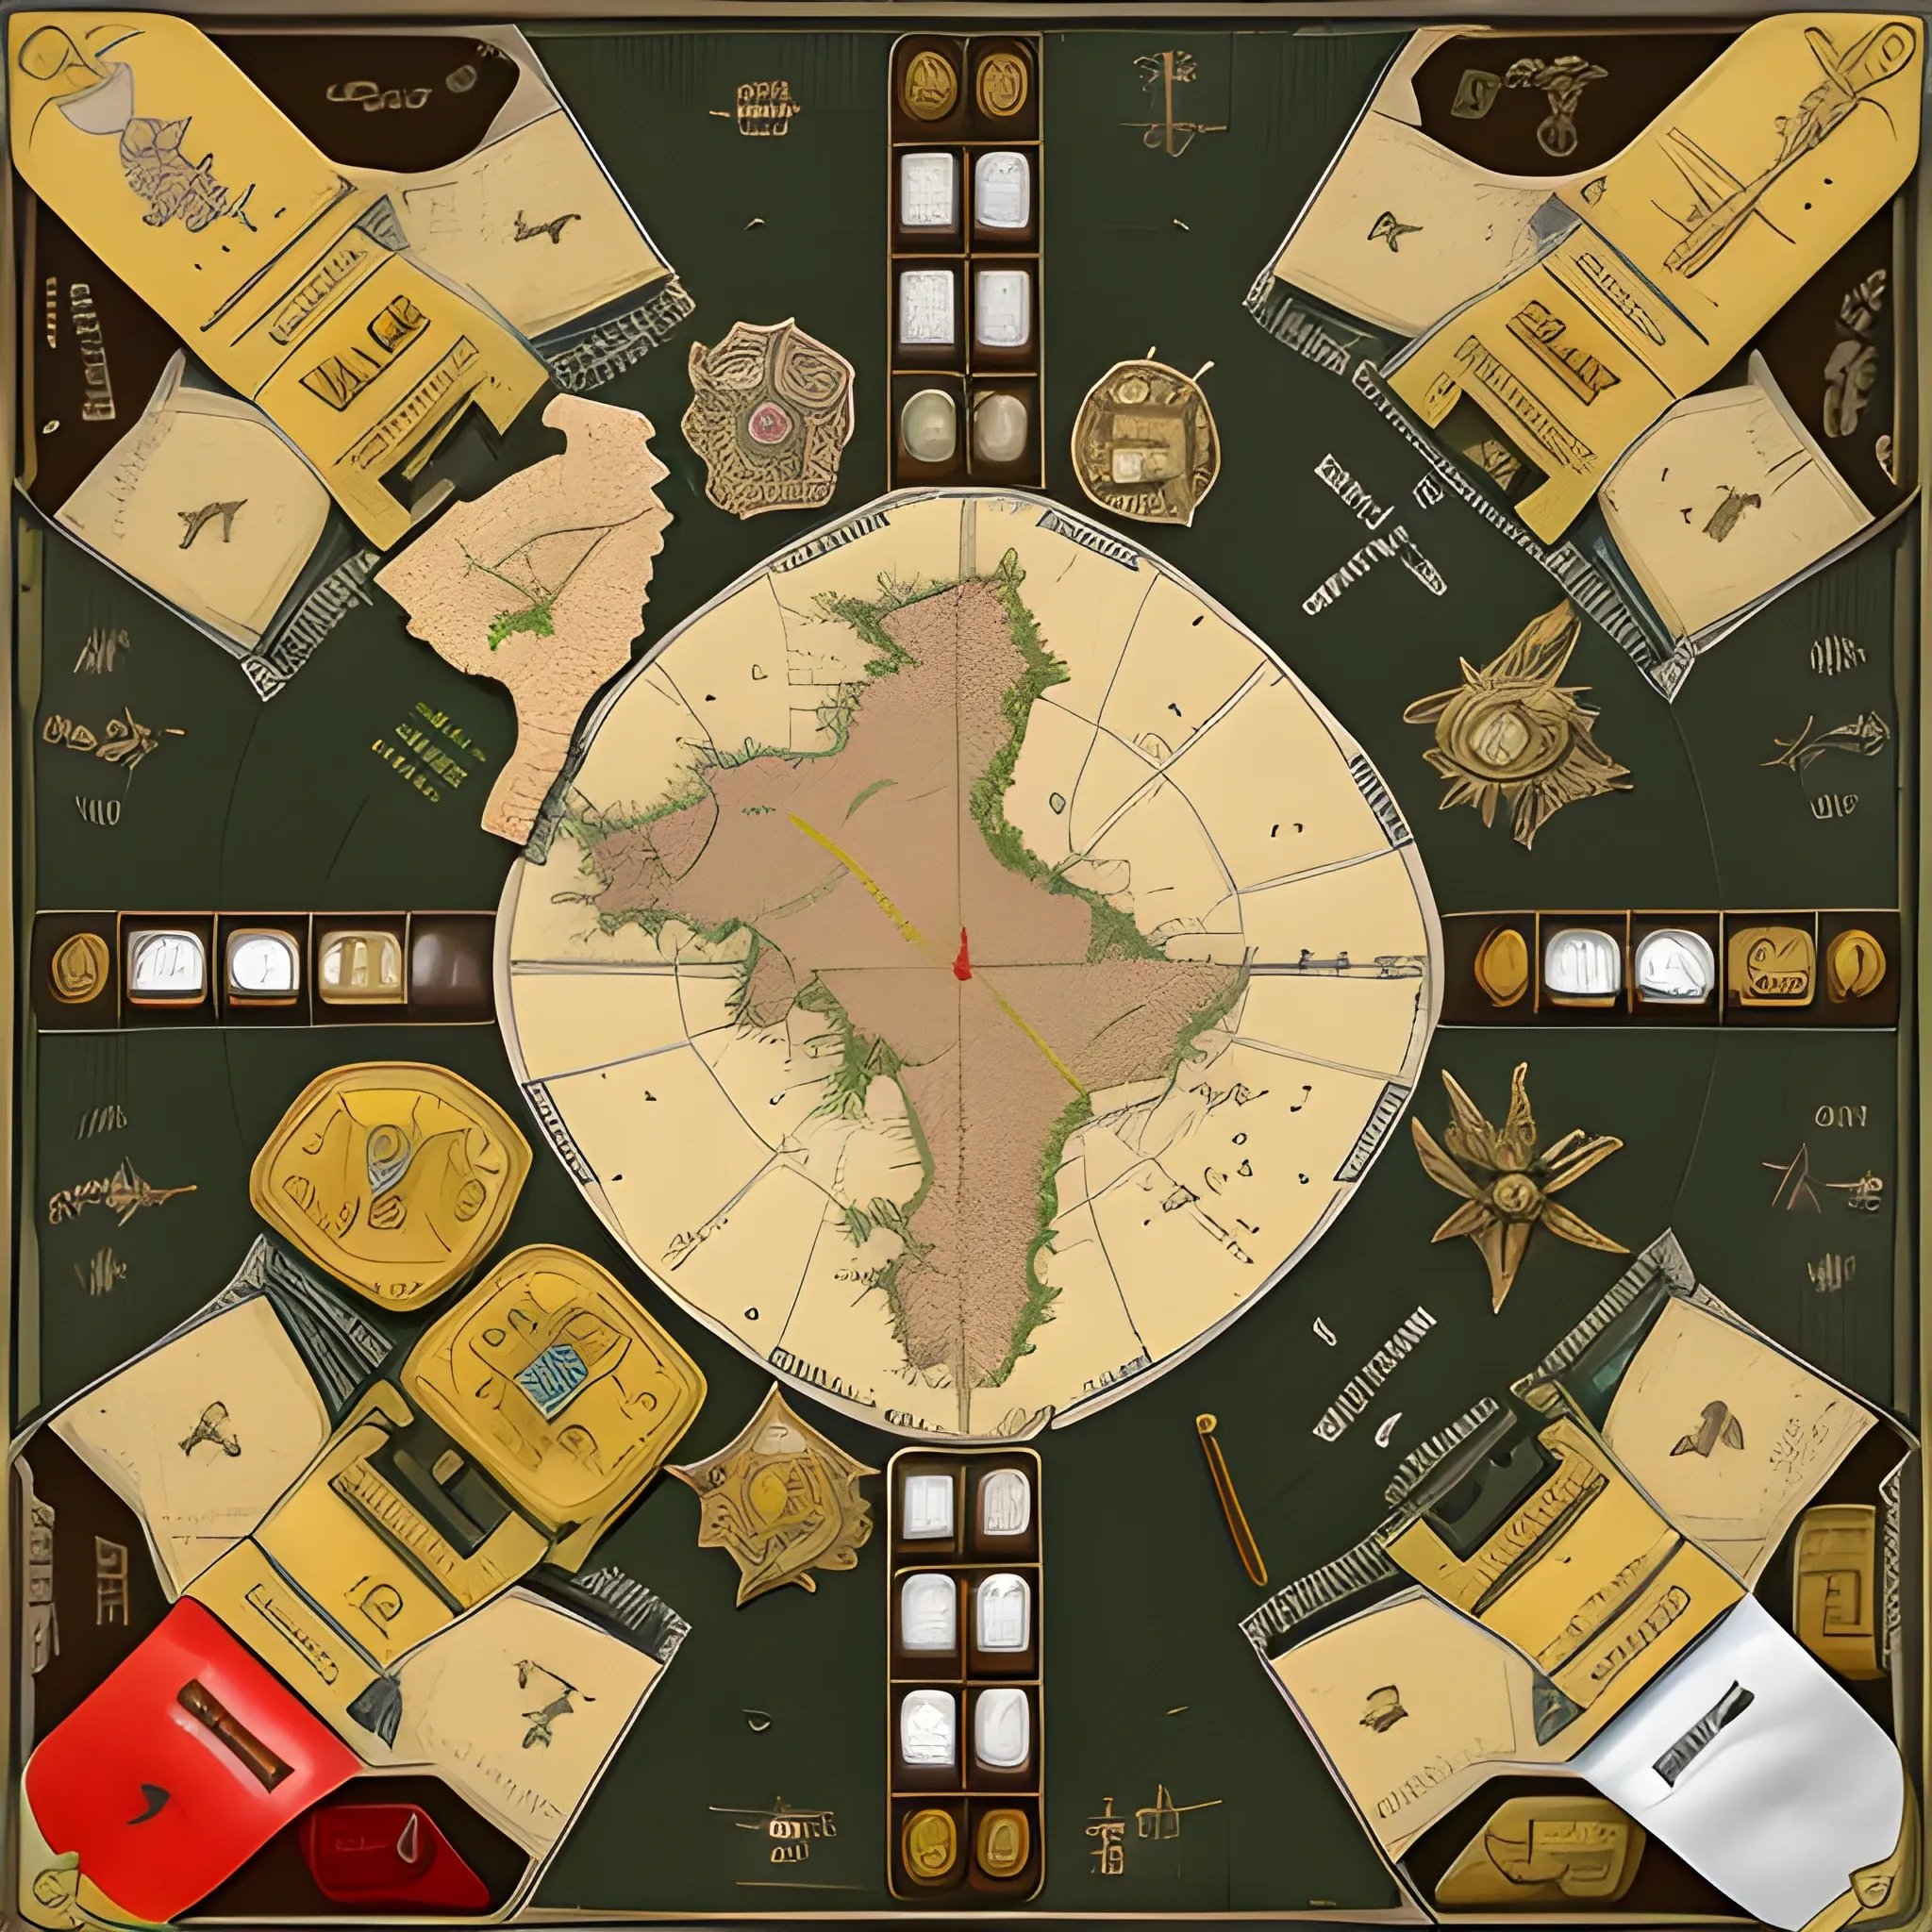 Conceptual image of a military strategy board game based on Argentina. Continental map, strategic resources, army unit tokens, gold coins. Highly detailed, high definition, Disney-style movie scene. Add two scissors, a glue, two six-sided dice, and two 10-sided dice to the scene.